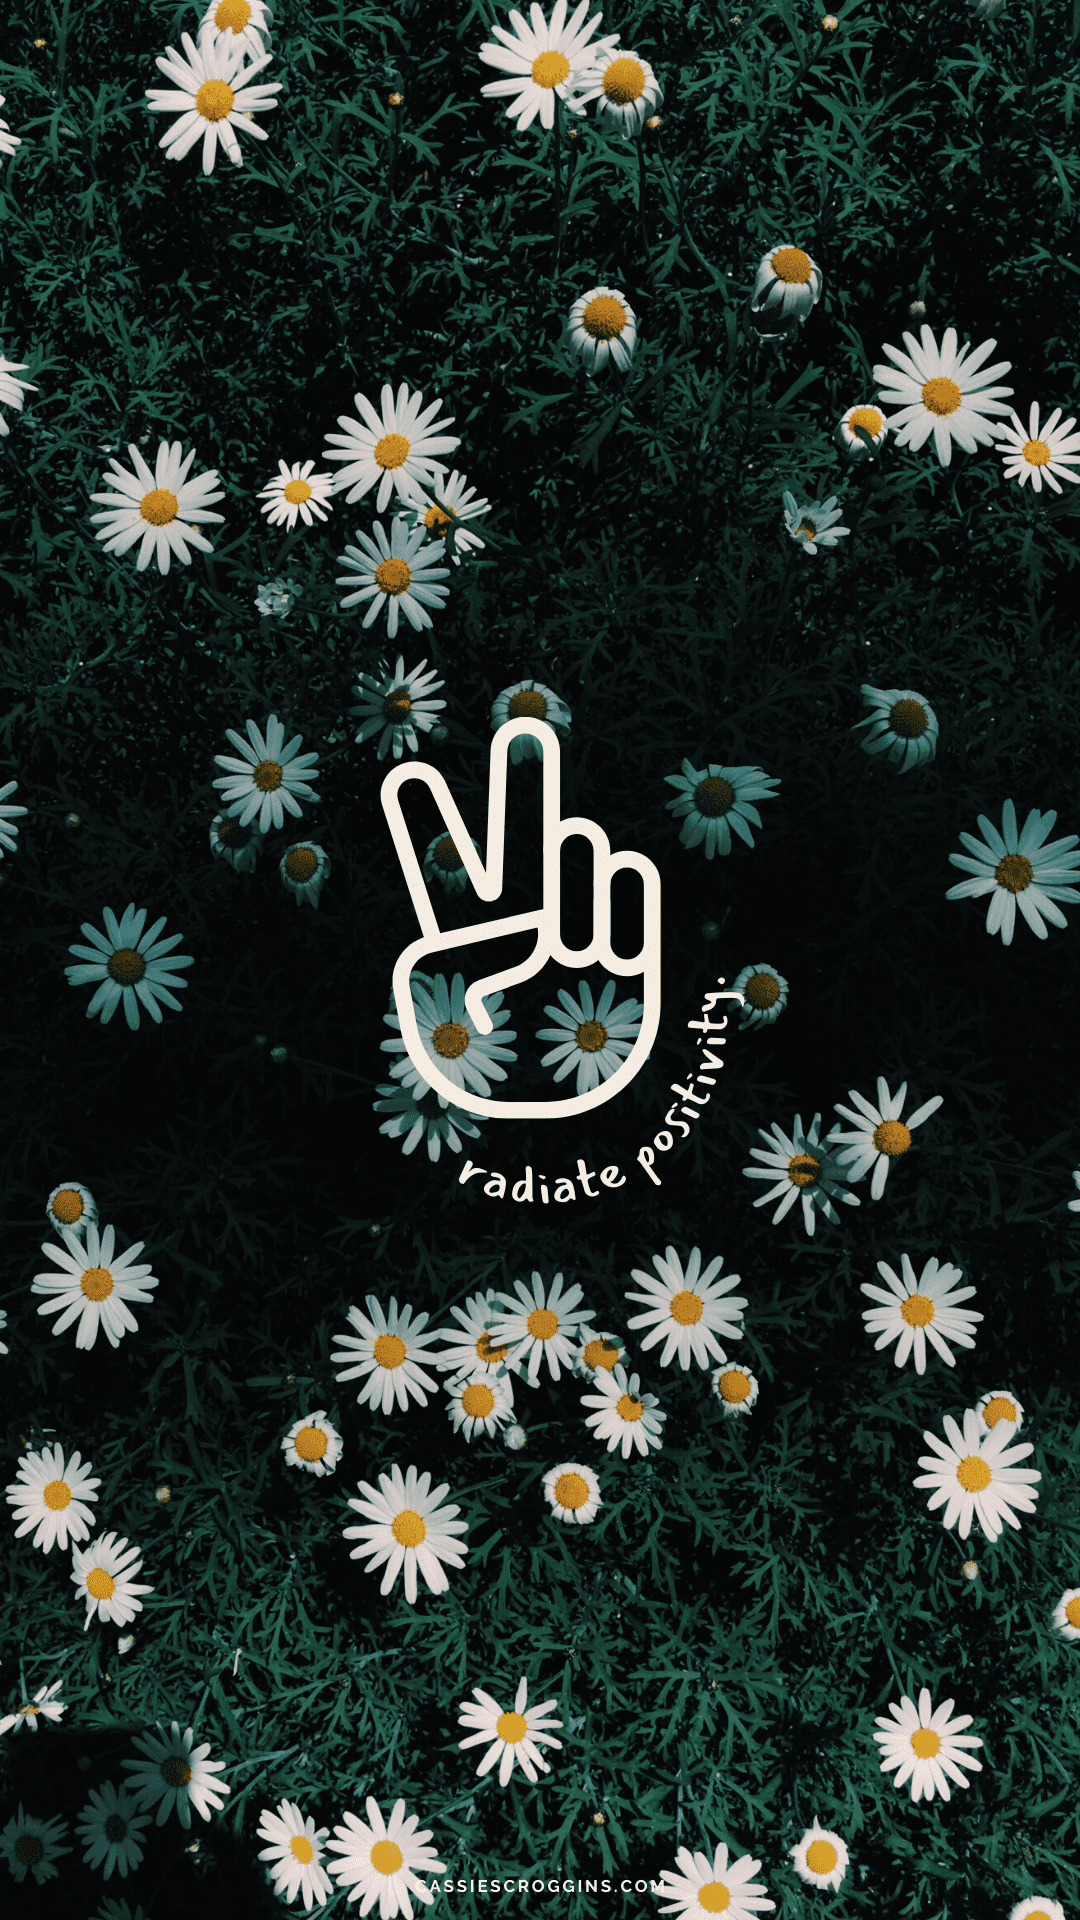 A phone wallpaper of a field of daisies with the peace sign and the words 